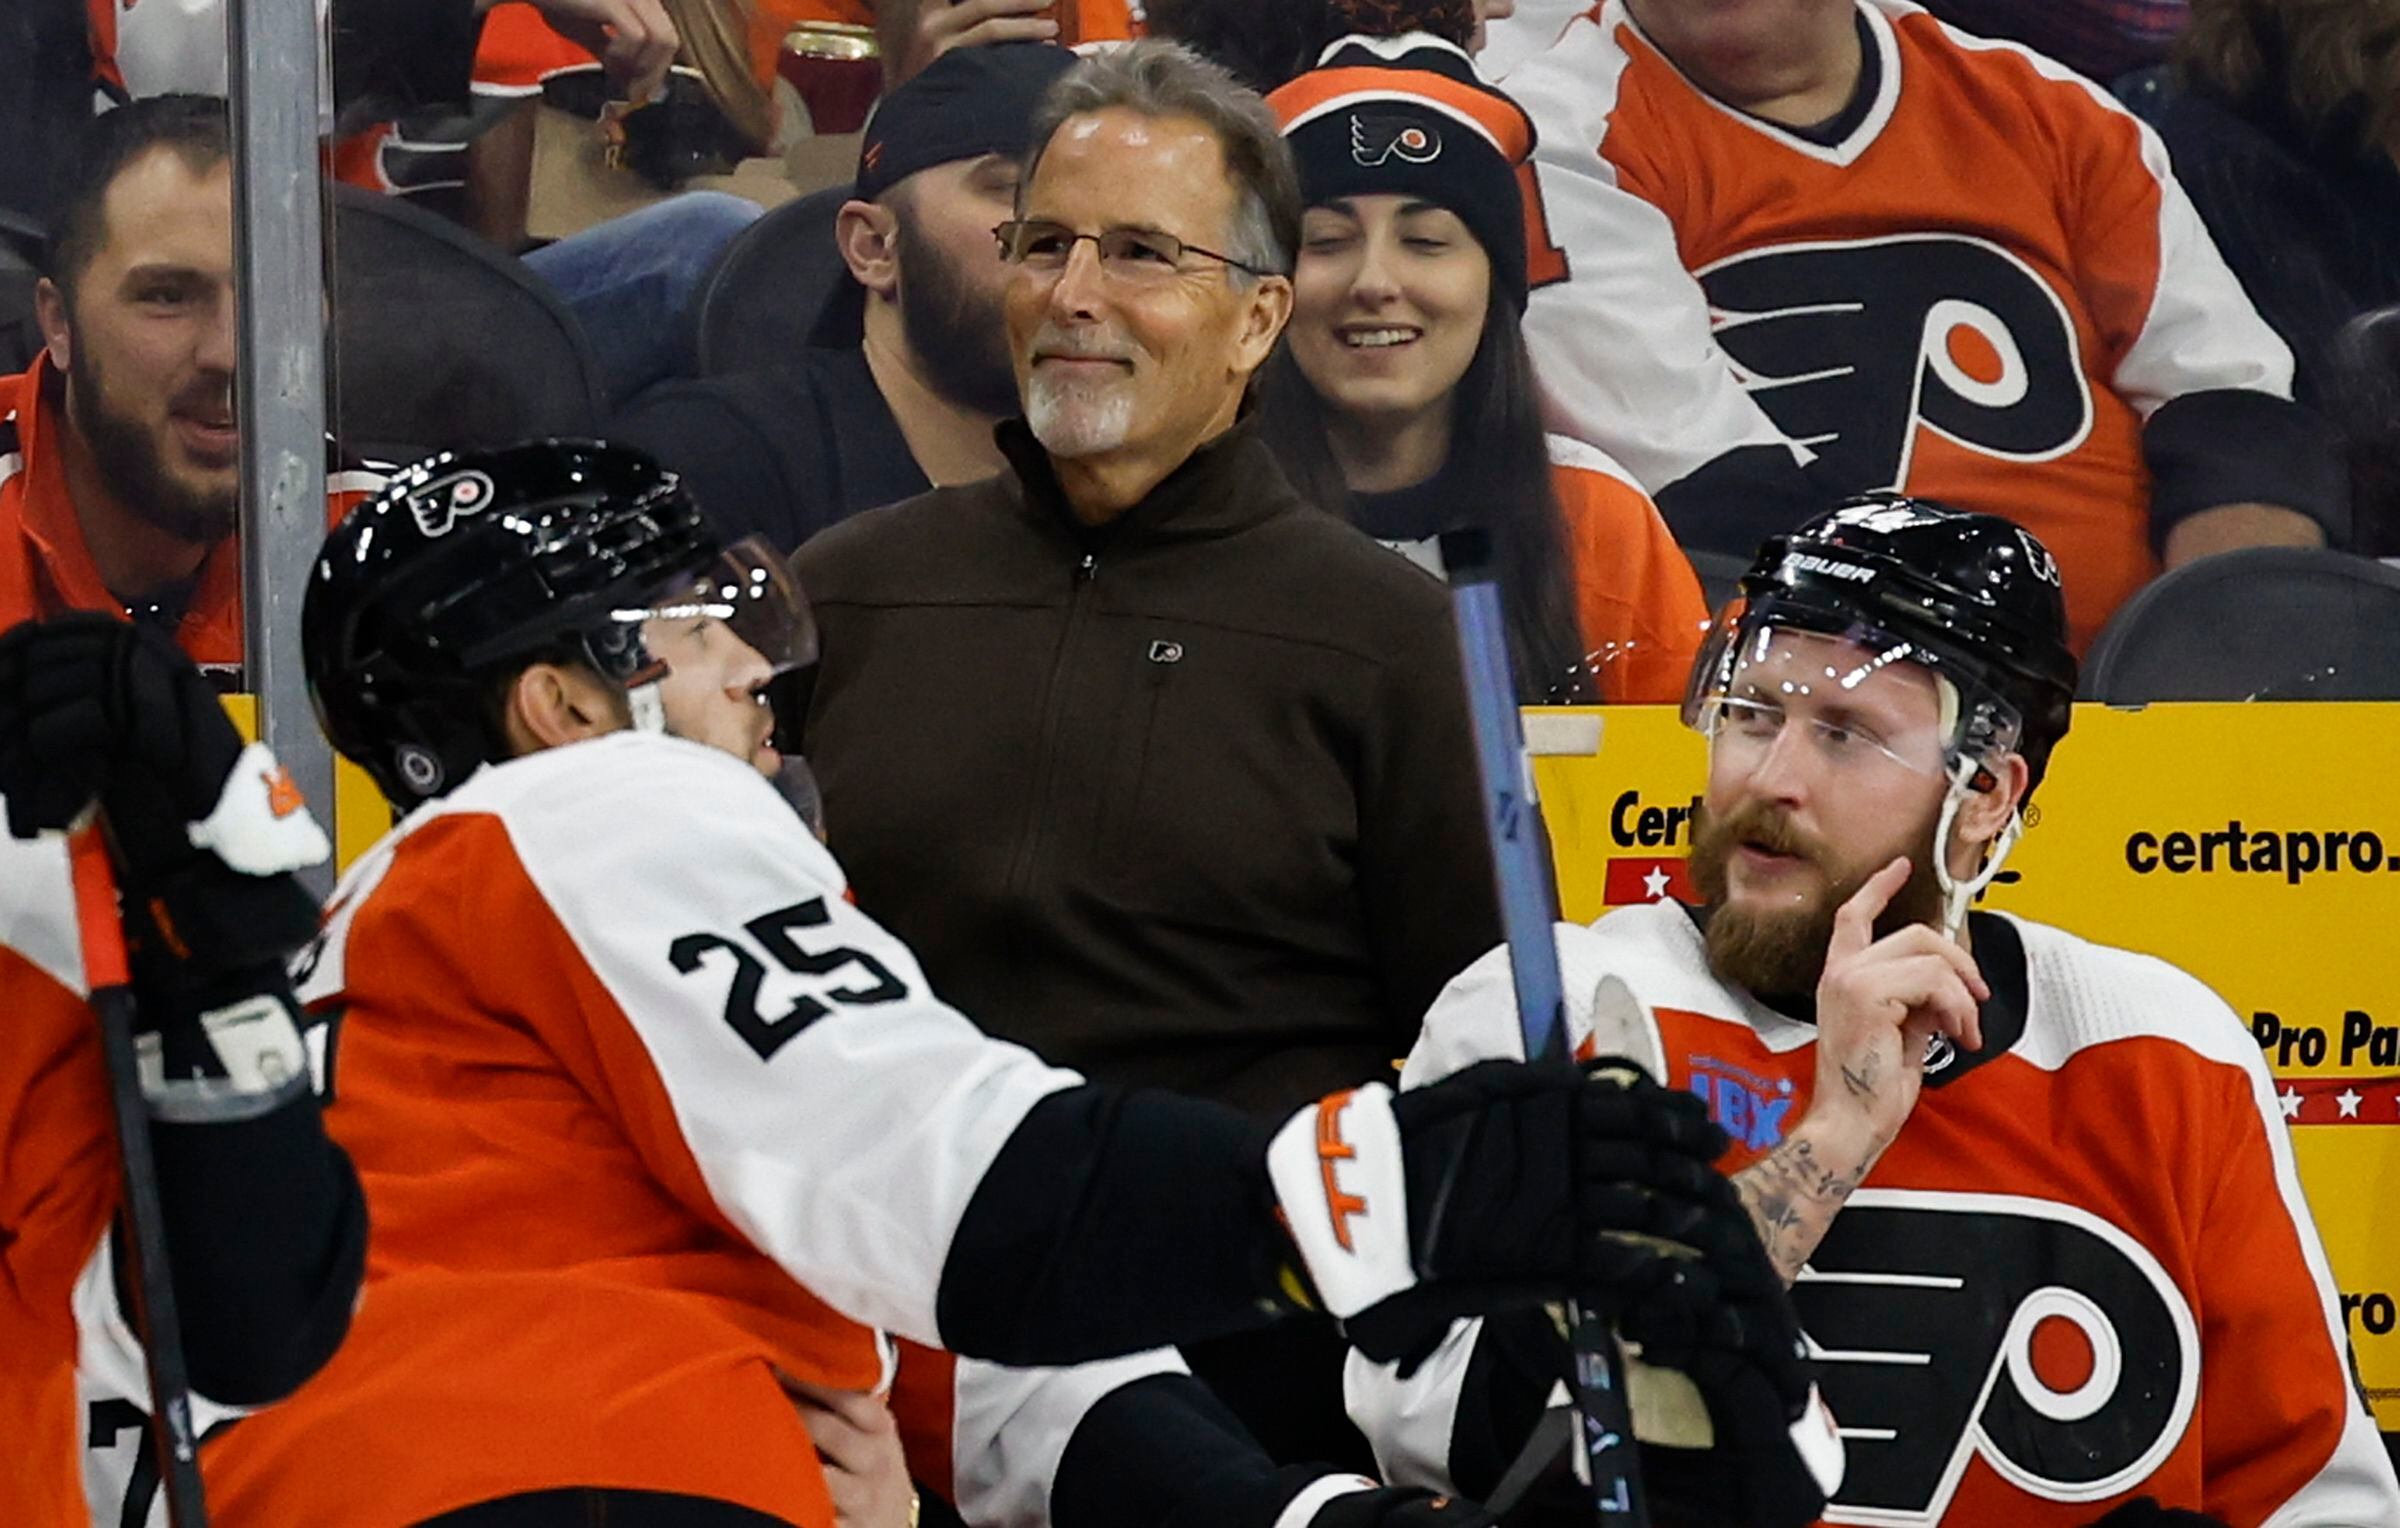 john tortorella has a young flyers team rolling. how? by changing his ways.